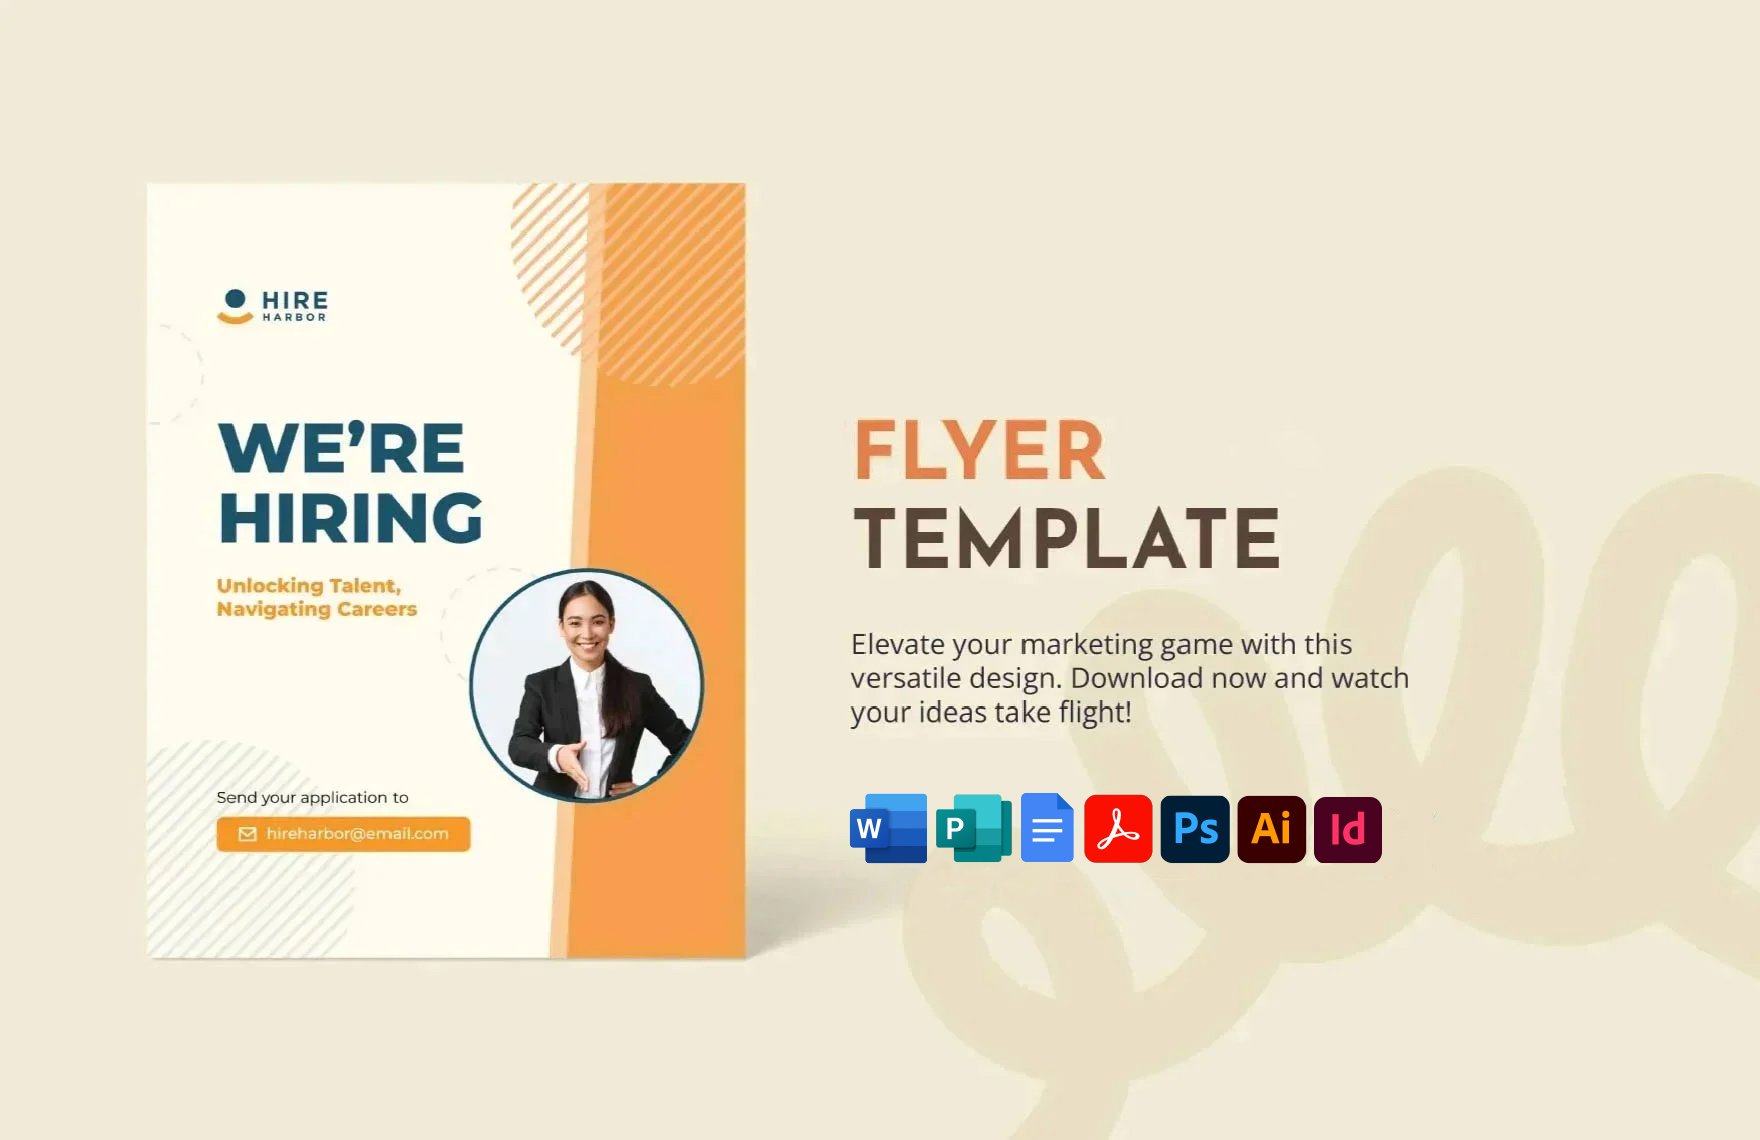 free psd poster templates download